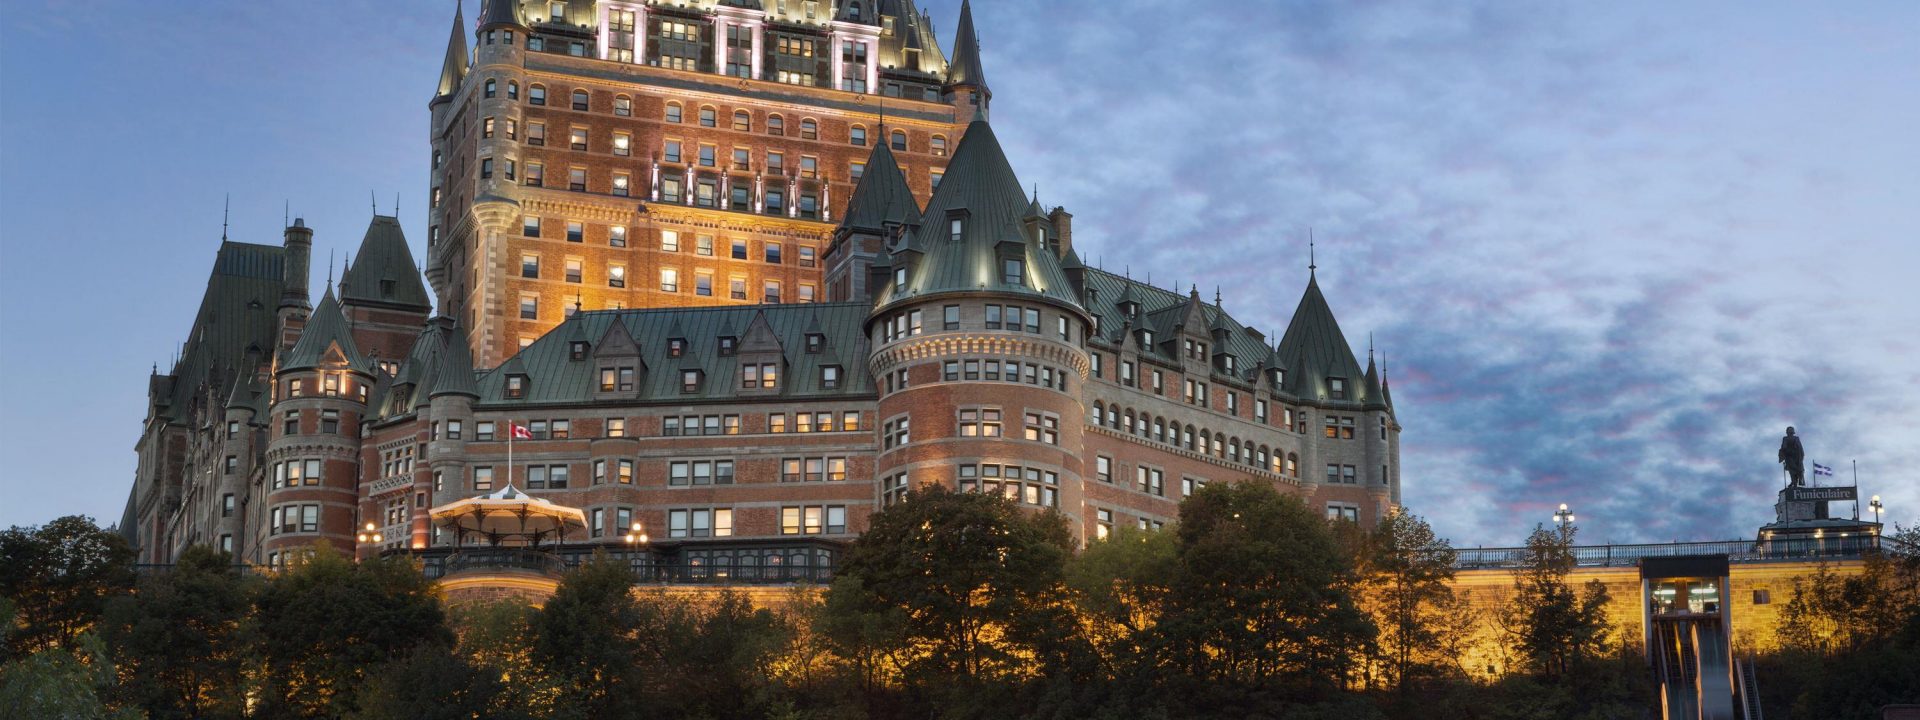 Quebec City’s Fairmont Le Chateau Frontenac is aging gracefully at 125 years